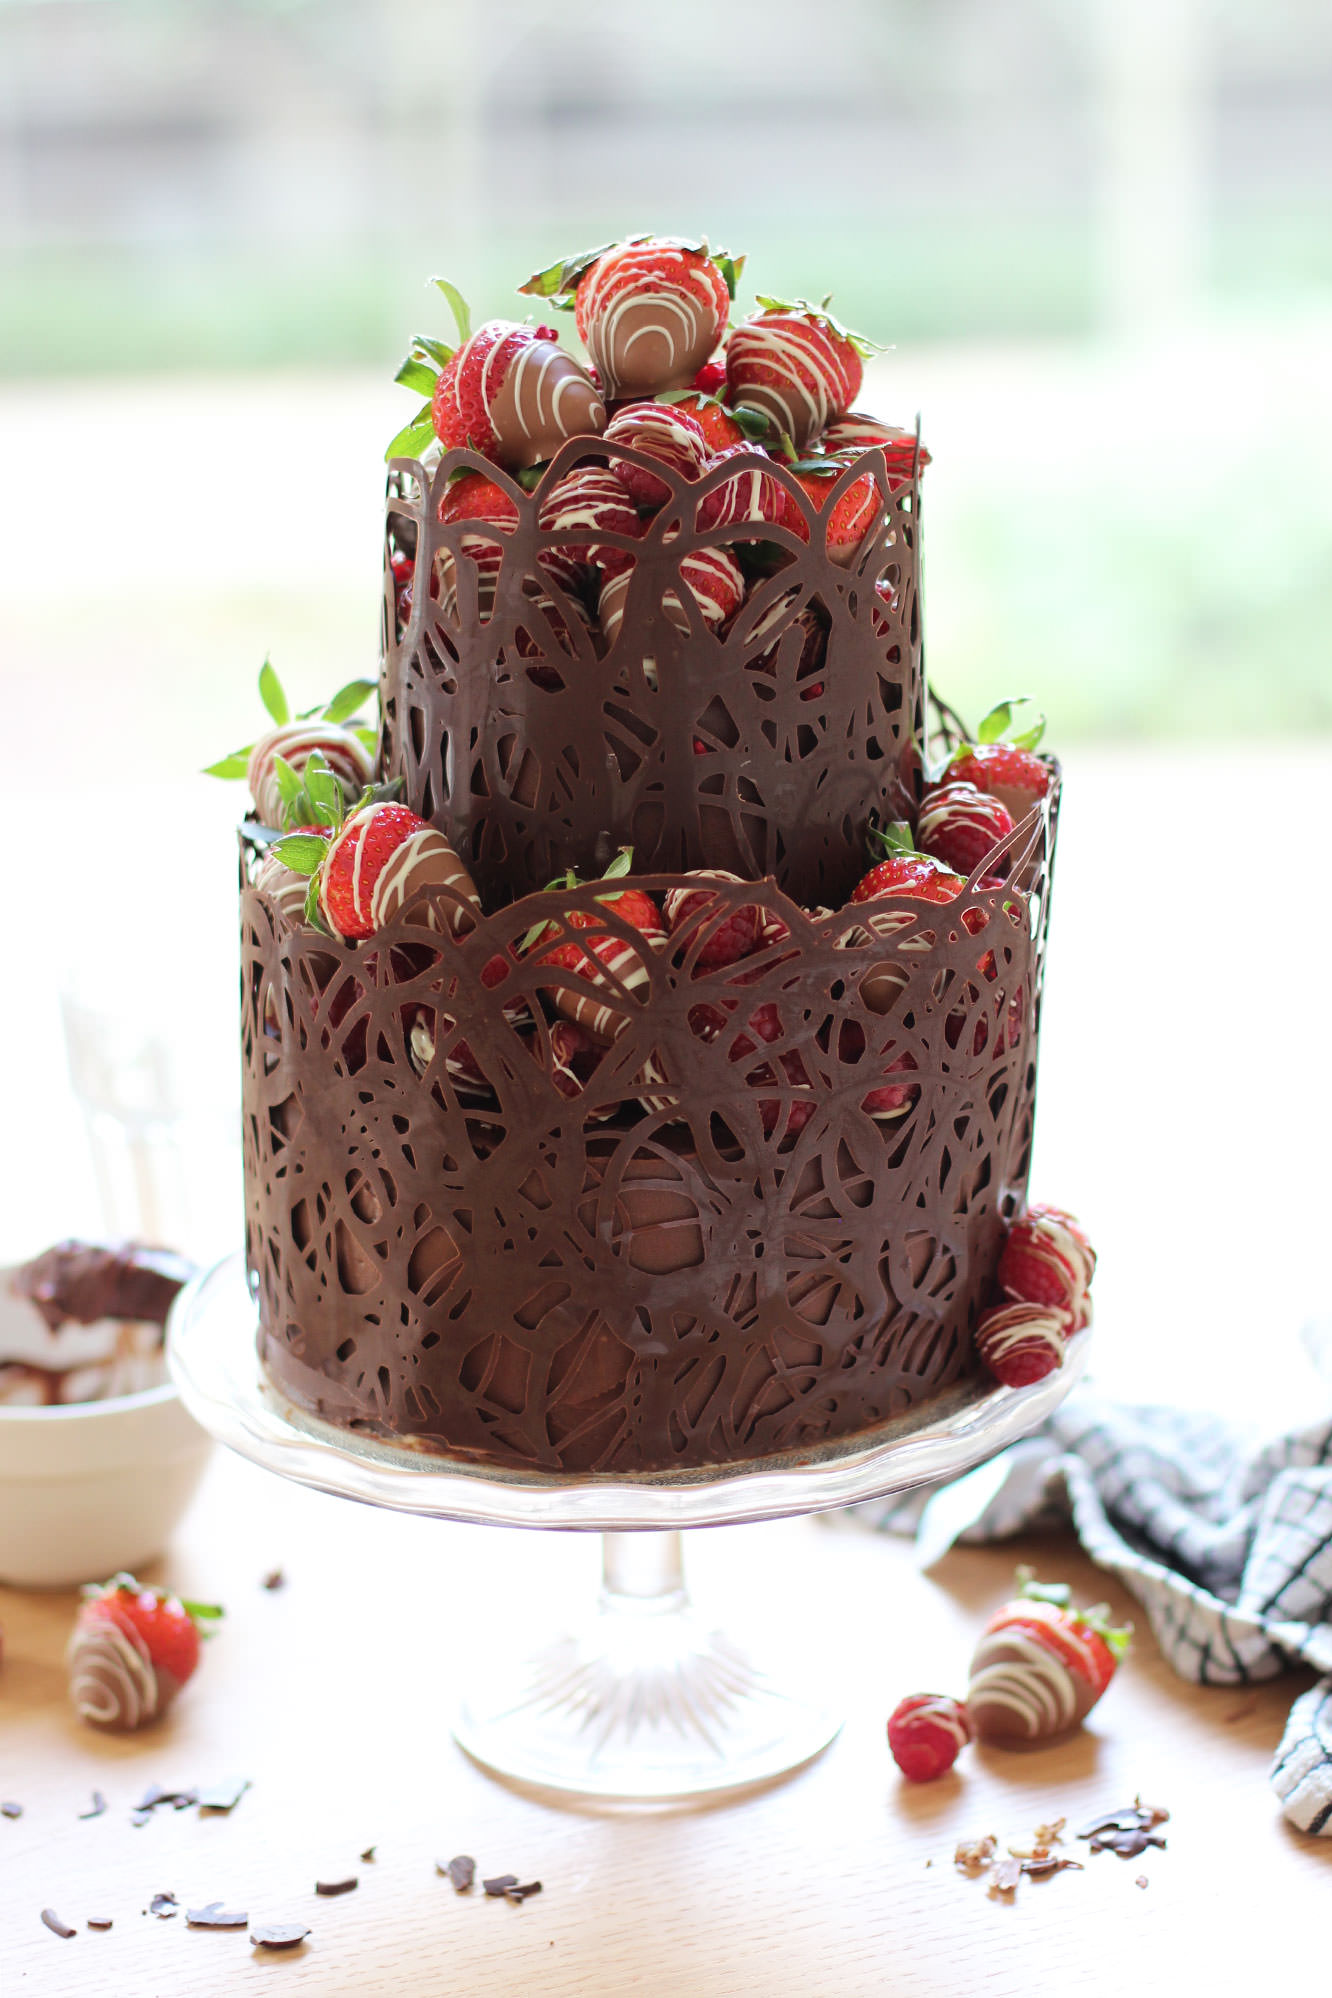 chocolate-salted-caramel-two-tier-occasion-cake-recipe-18